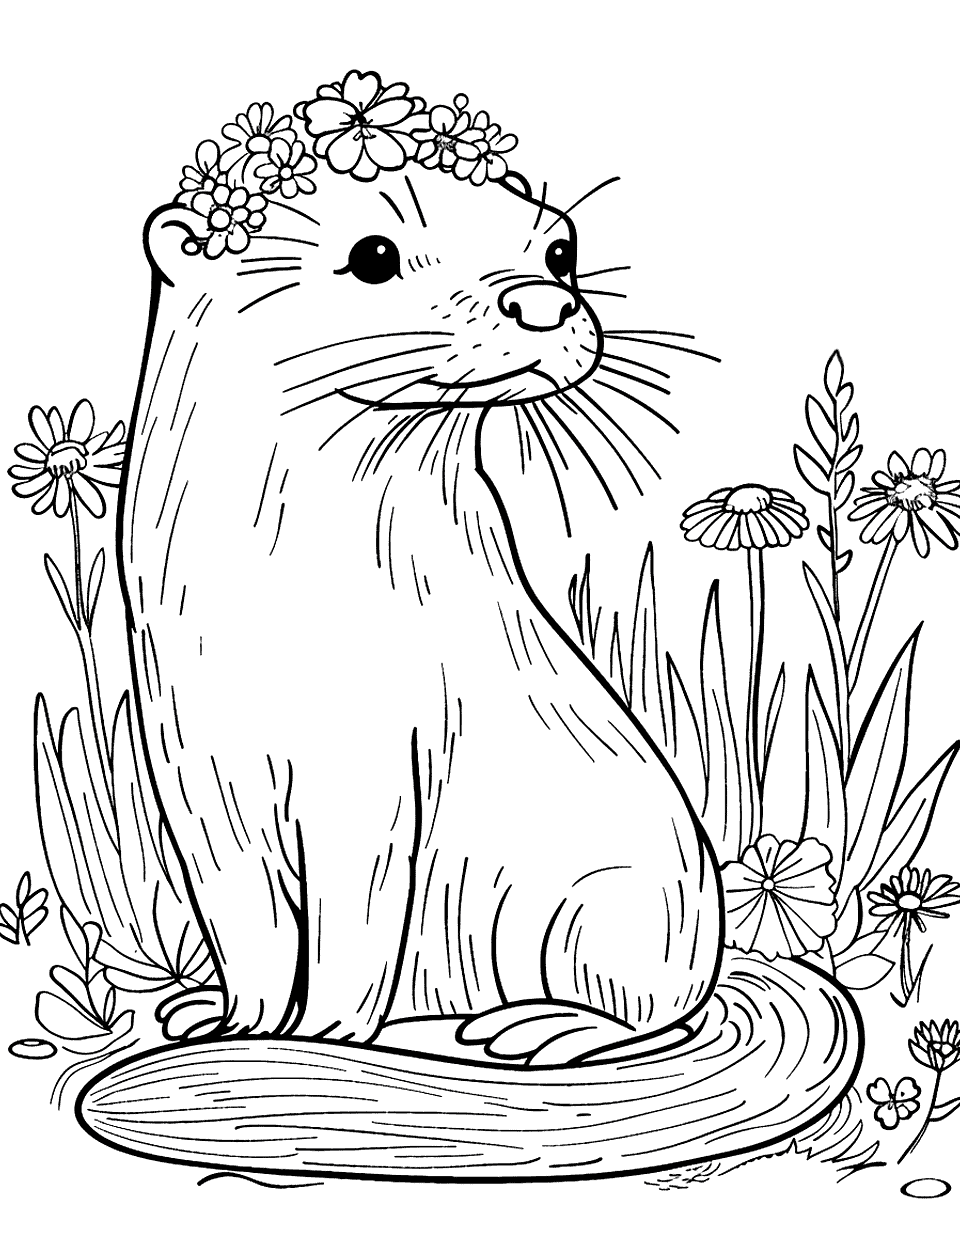 Otter with a Flower Crown Coloring Page - A cute otter wearing a crown made of wildflowers.